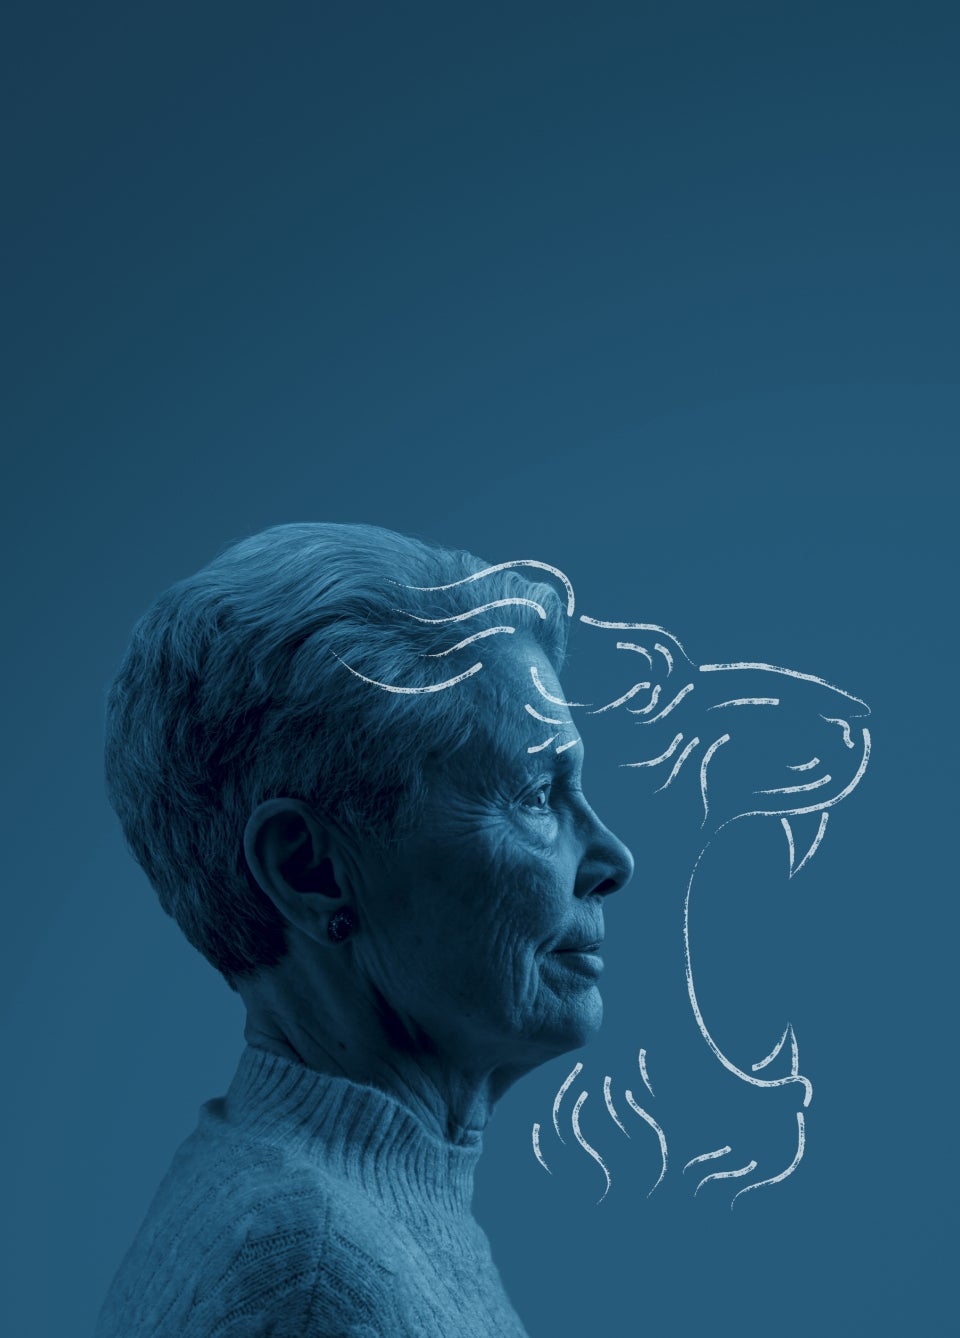 illustration of a lion overlaid over a photo of a woman's face